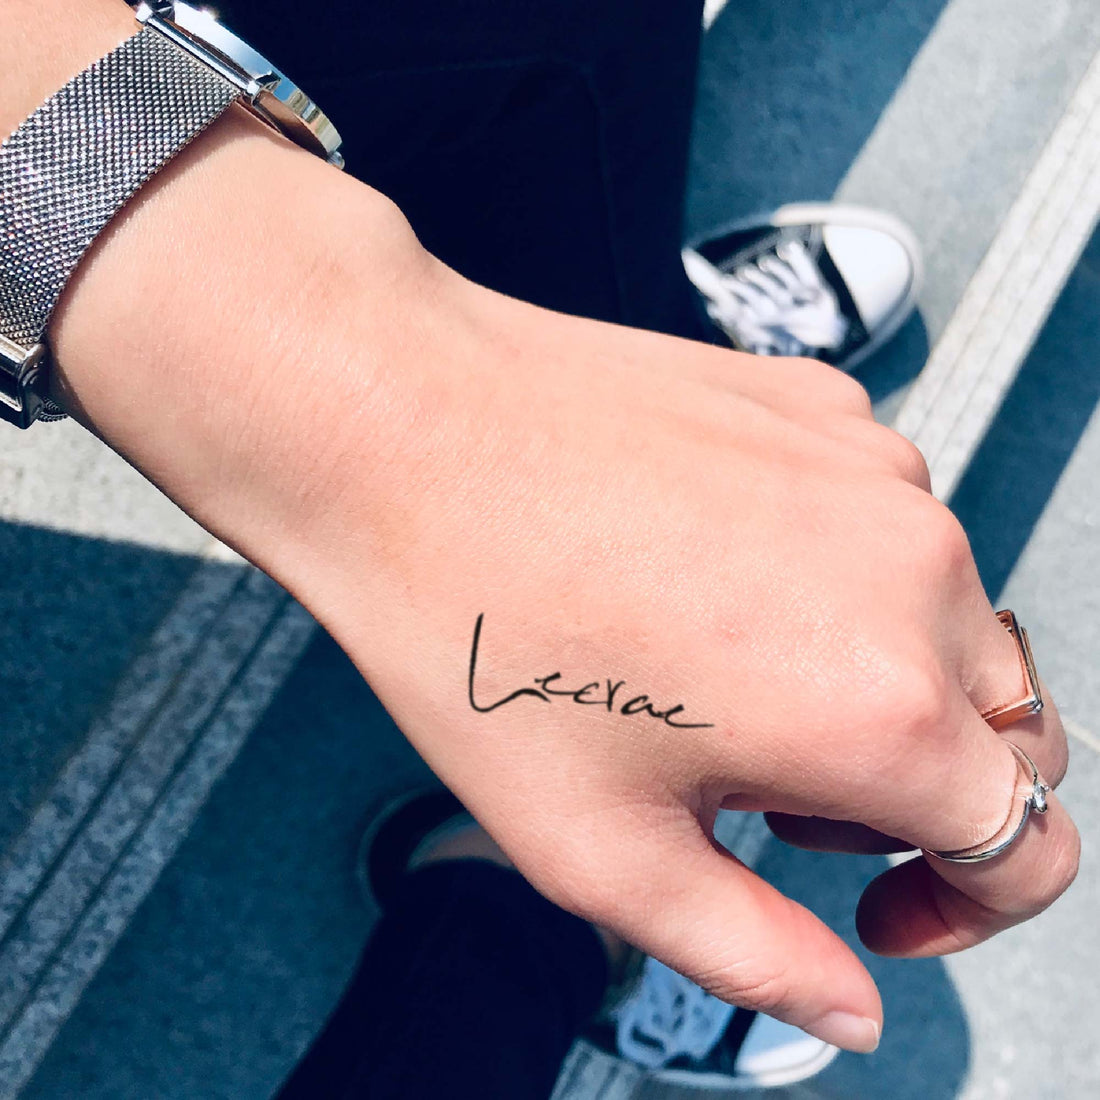 Lecrae custom temporary tattoo sticker design idea inspiration meanings removal arm wrist hand words font name signature calligraphy lyrics tour concert outfits merch accessory gift souvenir costumes wear dress up code